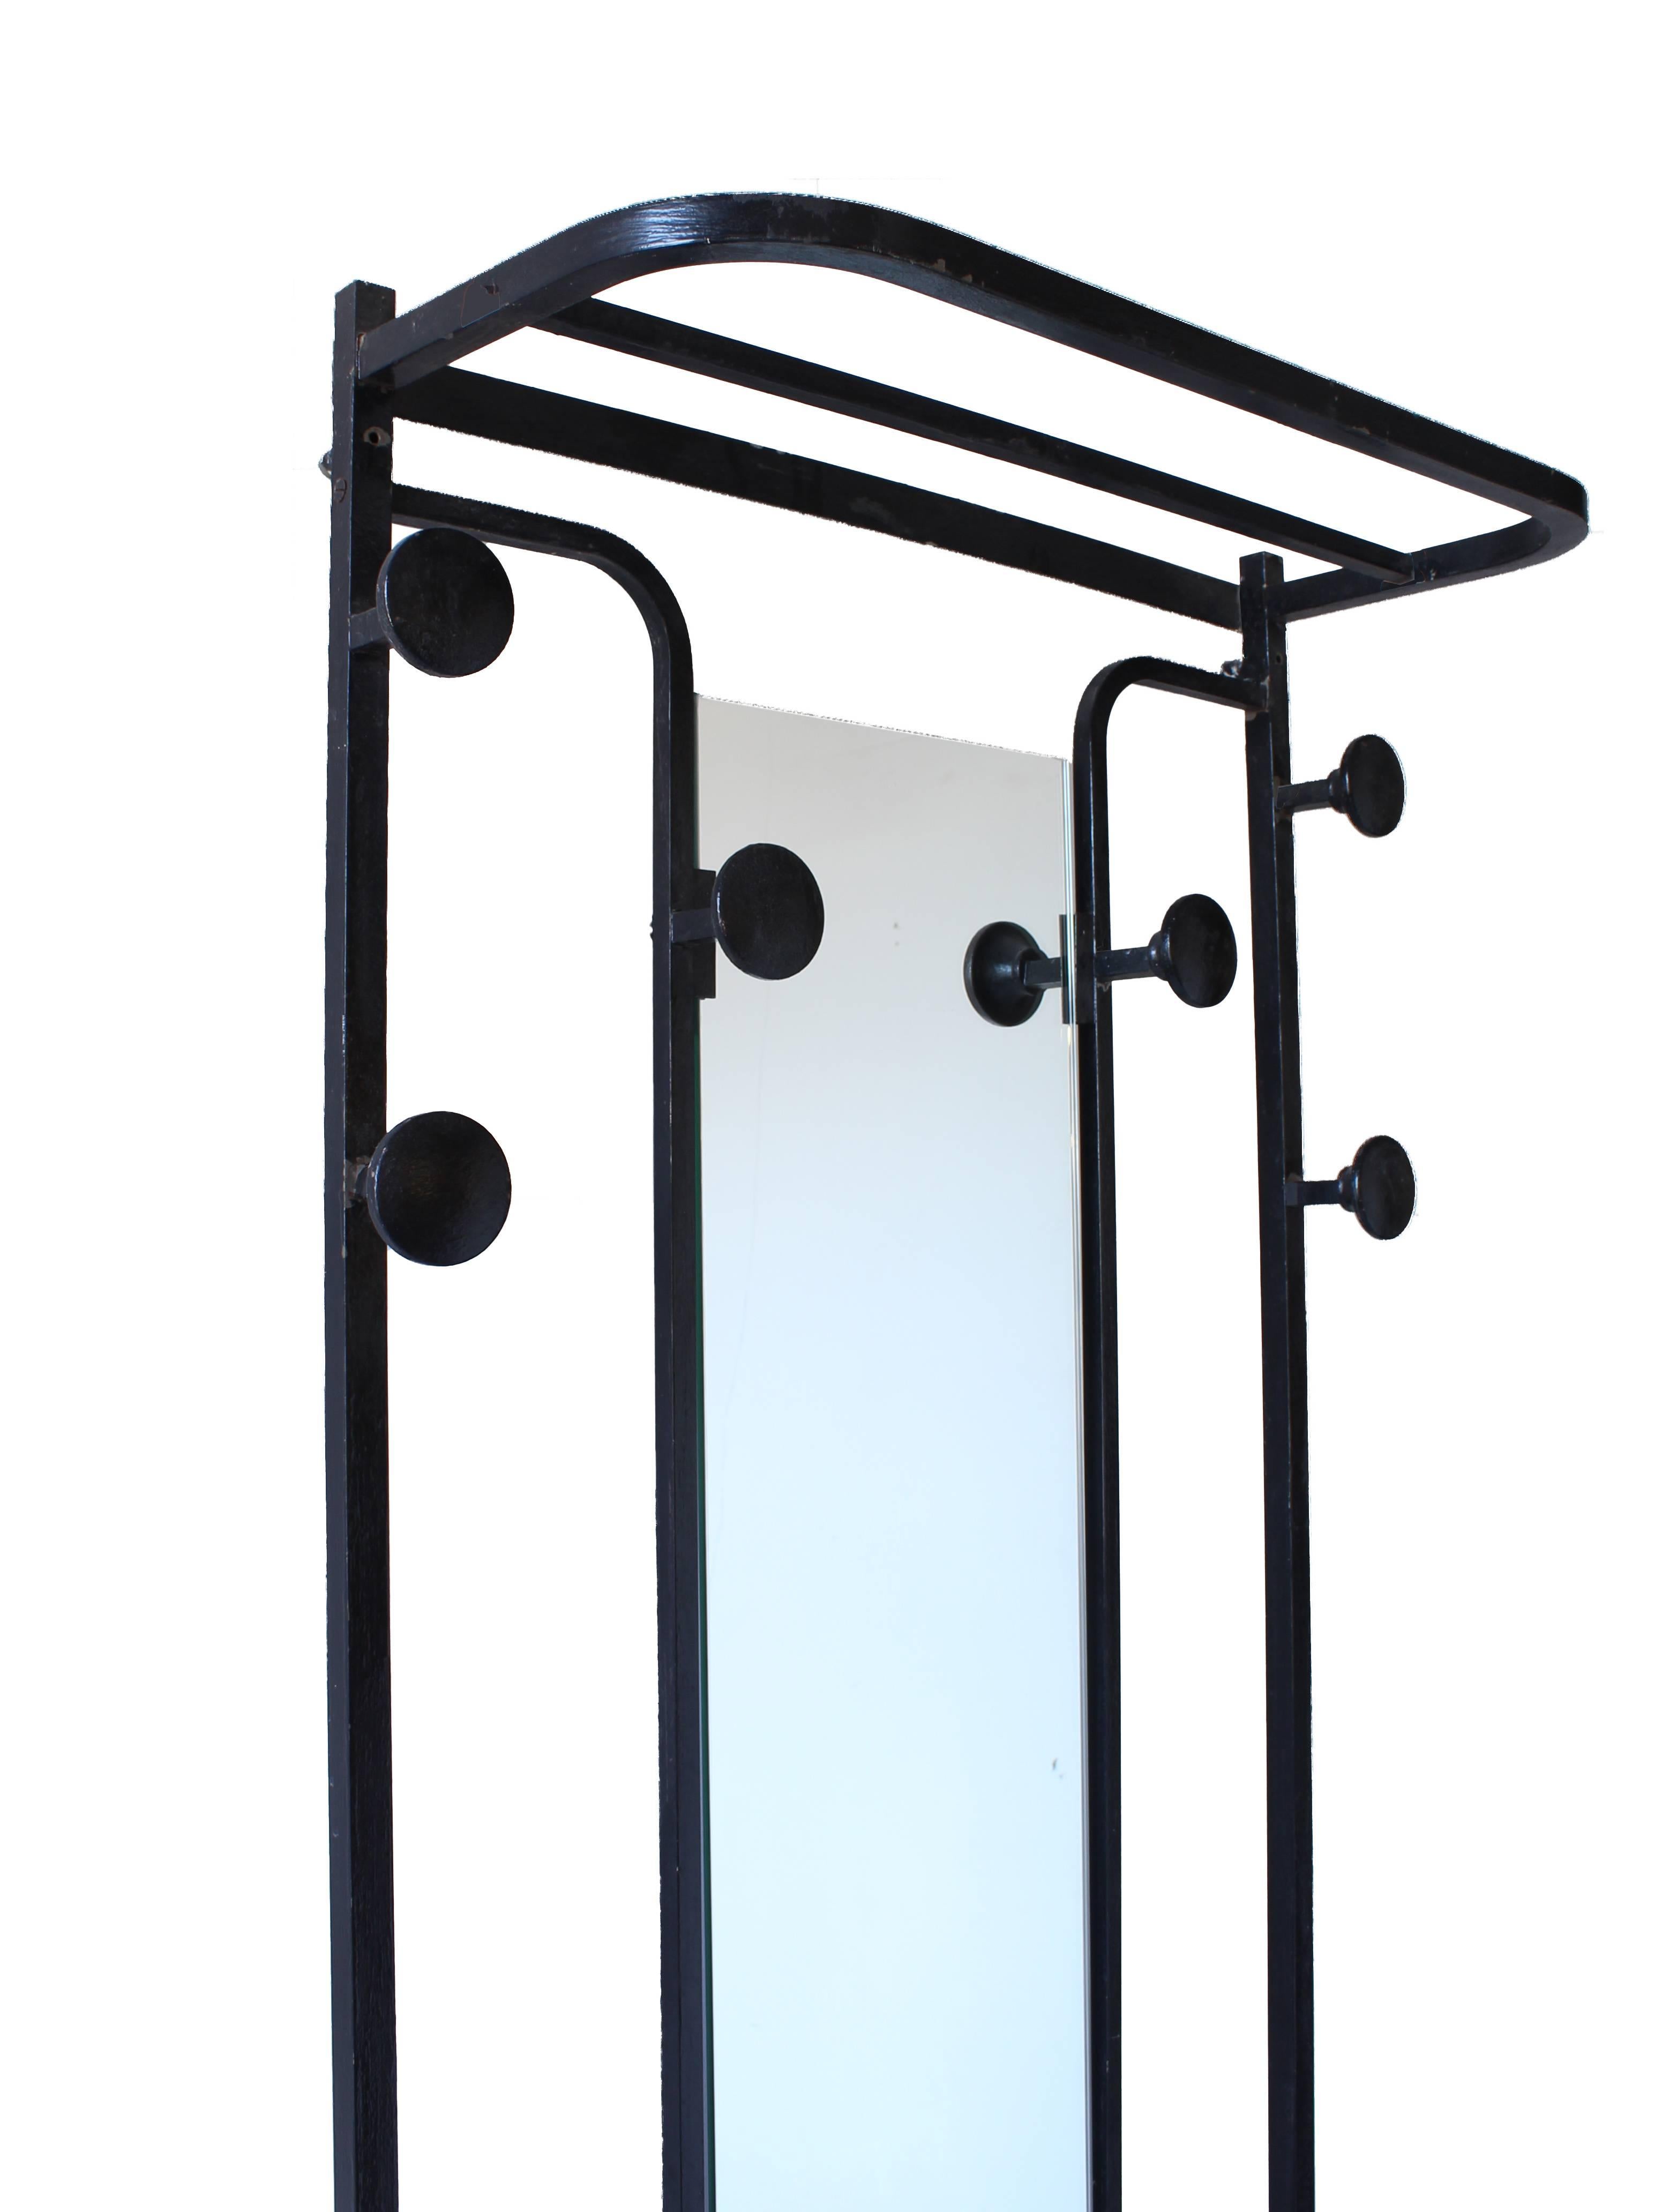 Coat rack in hand-painted black steel. Upper and lower shelves and six coat hanger knobs. Center mirror is new. Original wall mounting holes and standoffs at the top or rack.

Architect, Sandy Littman of Duesenberg LTD.  and The American Glass Light